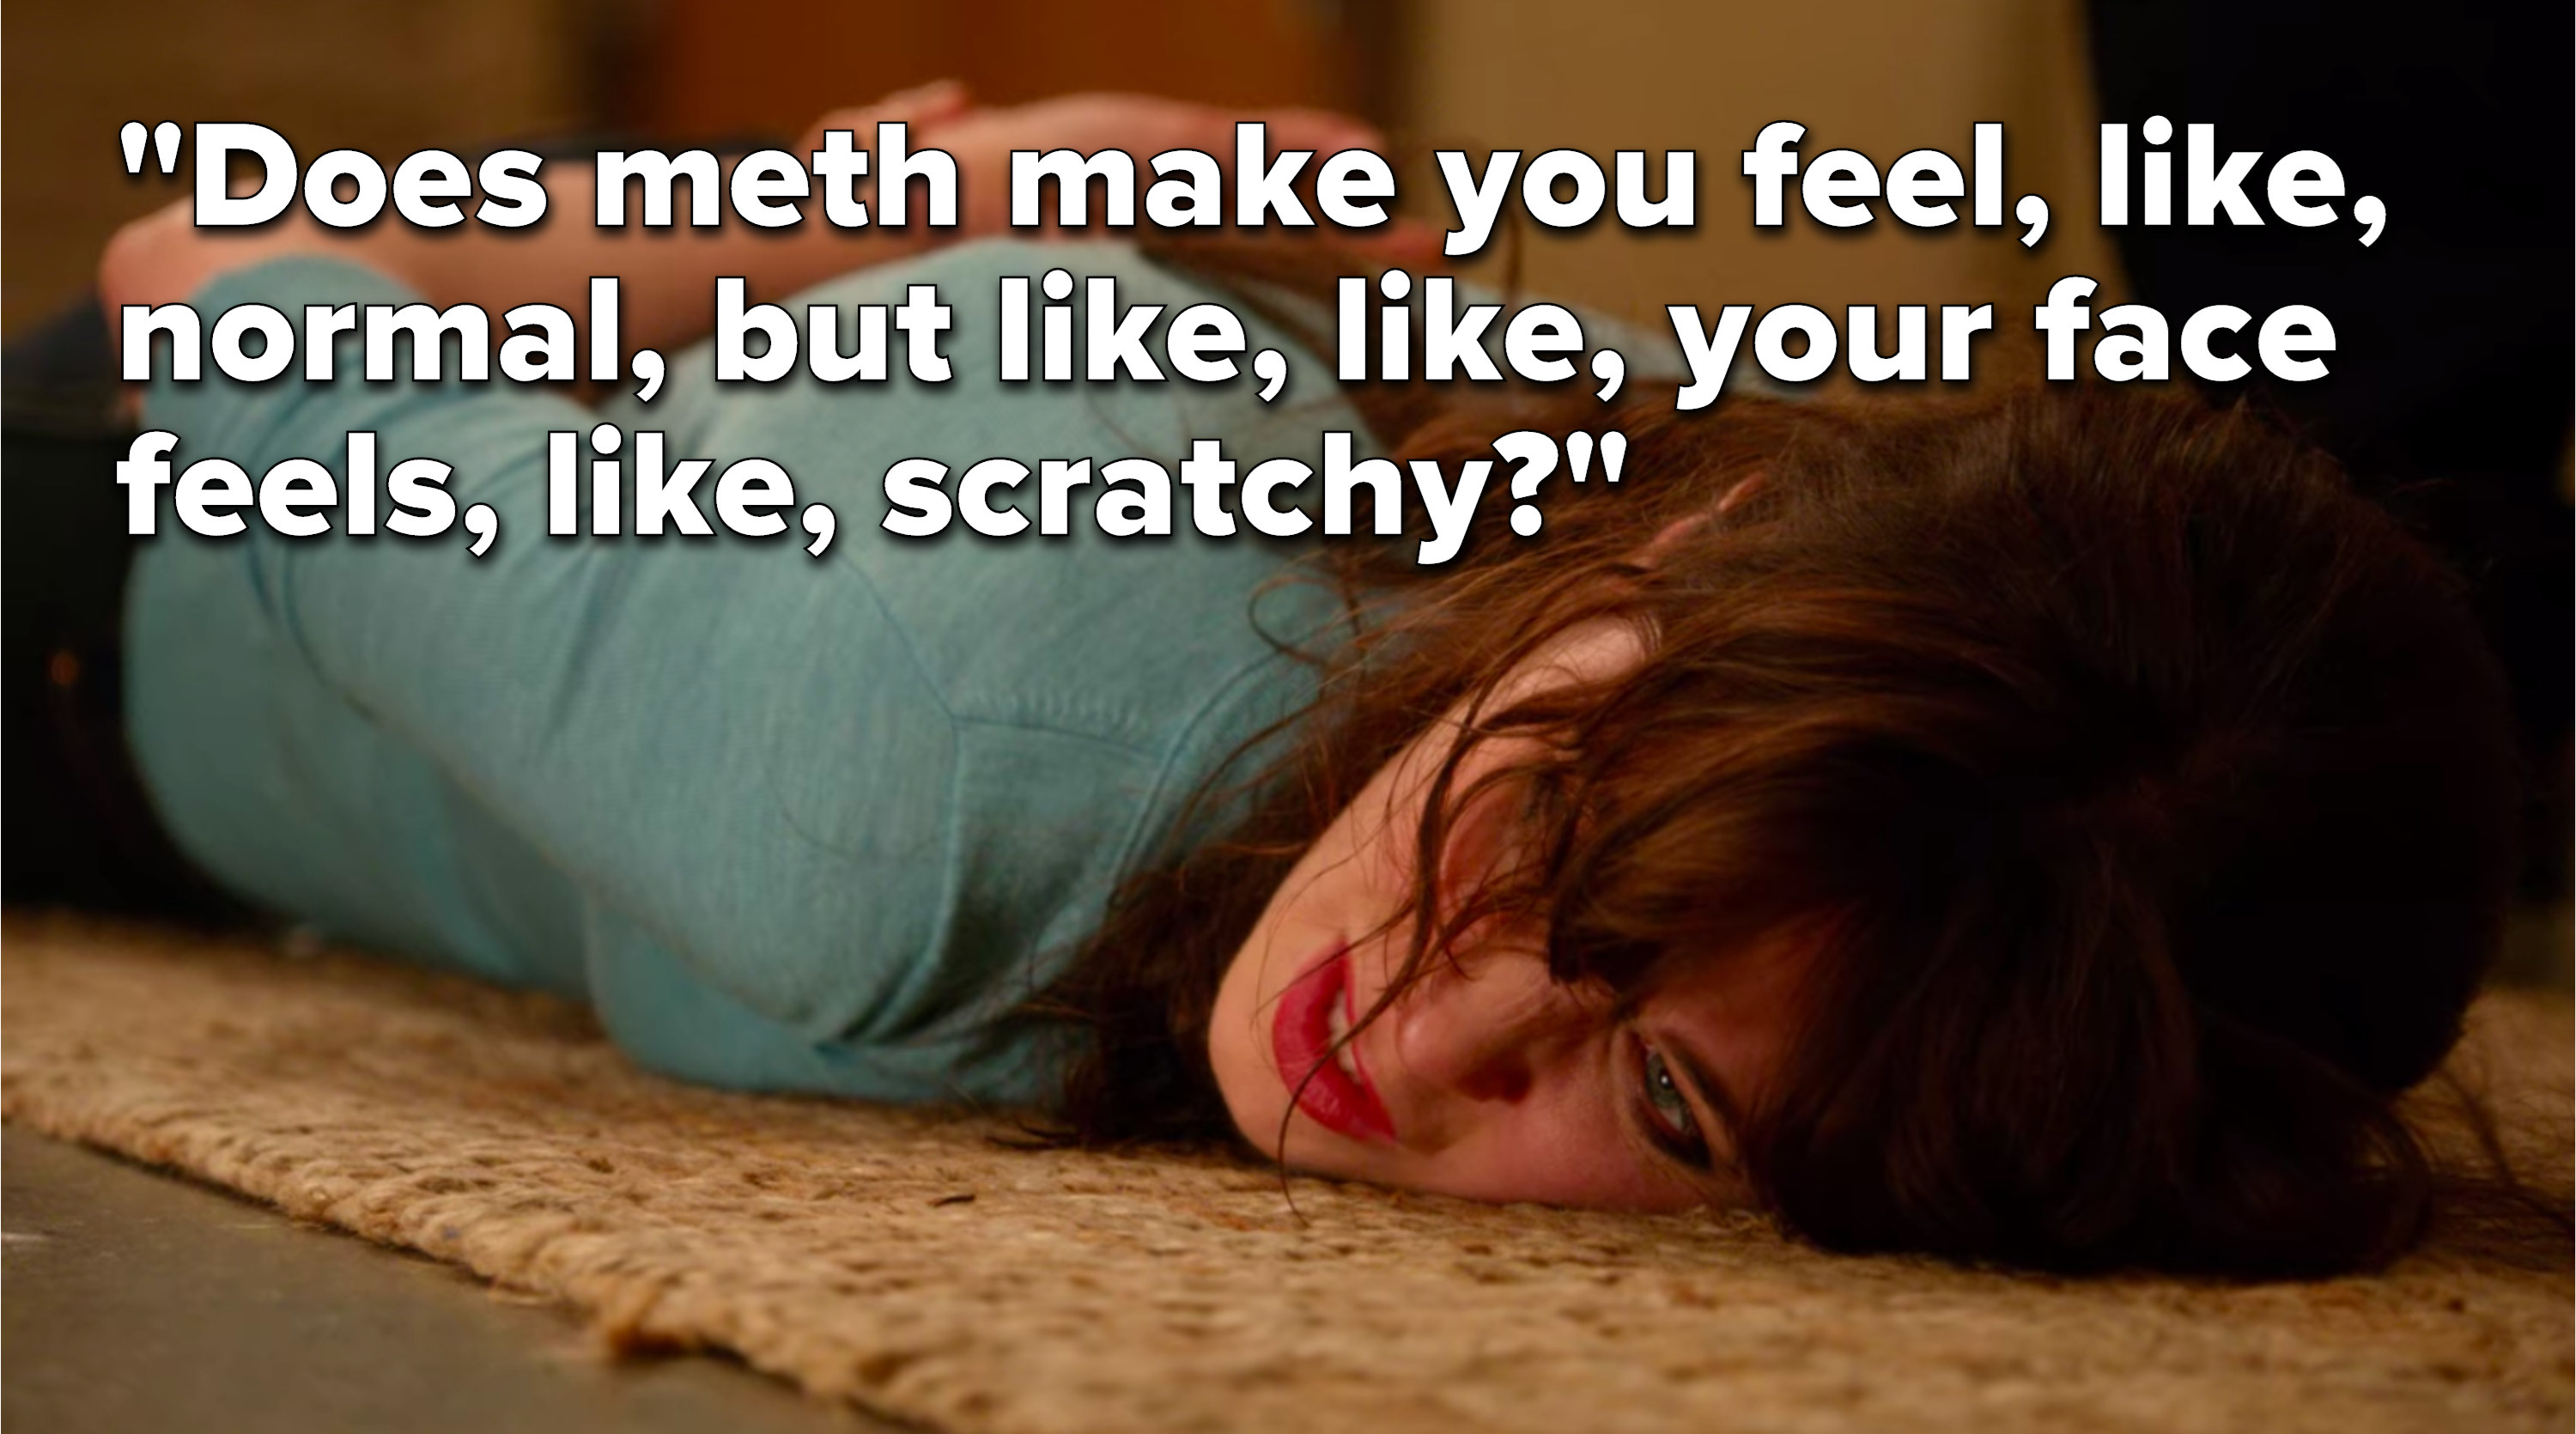 Jess says, &quot;Does meth make you feel, like, normal, but like, like, your face feels, like, scratchy&quot;